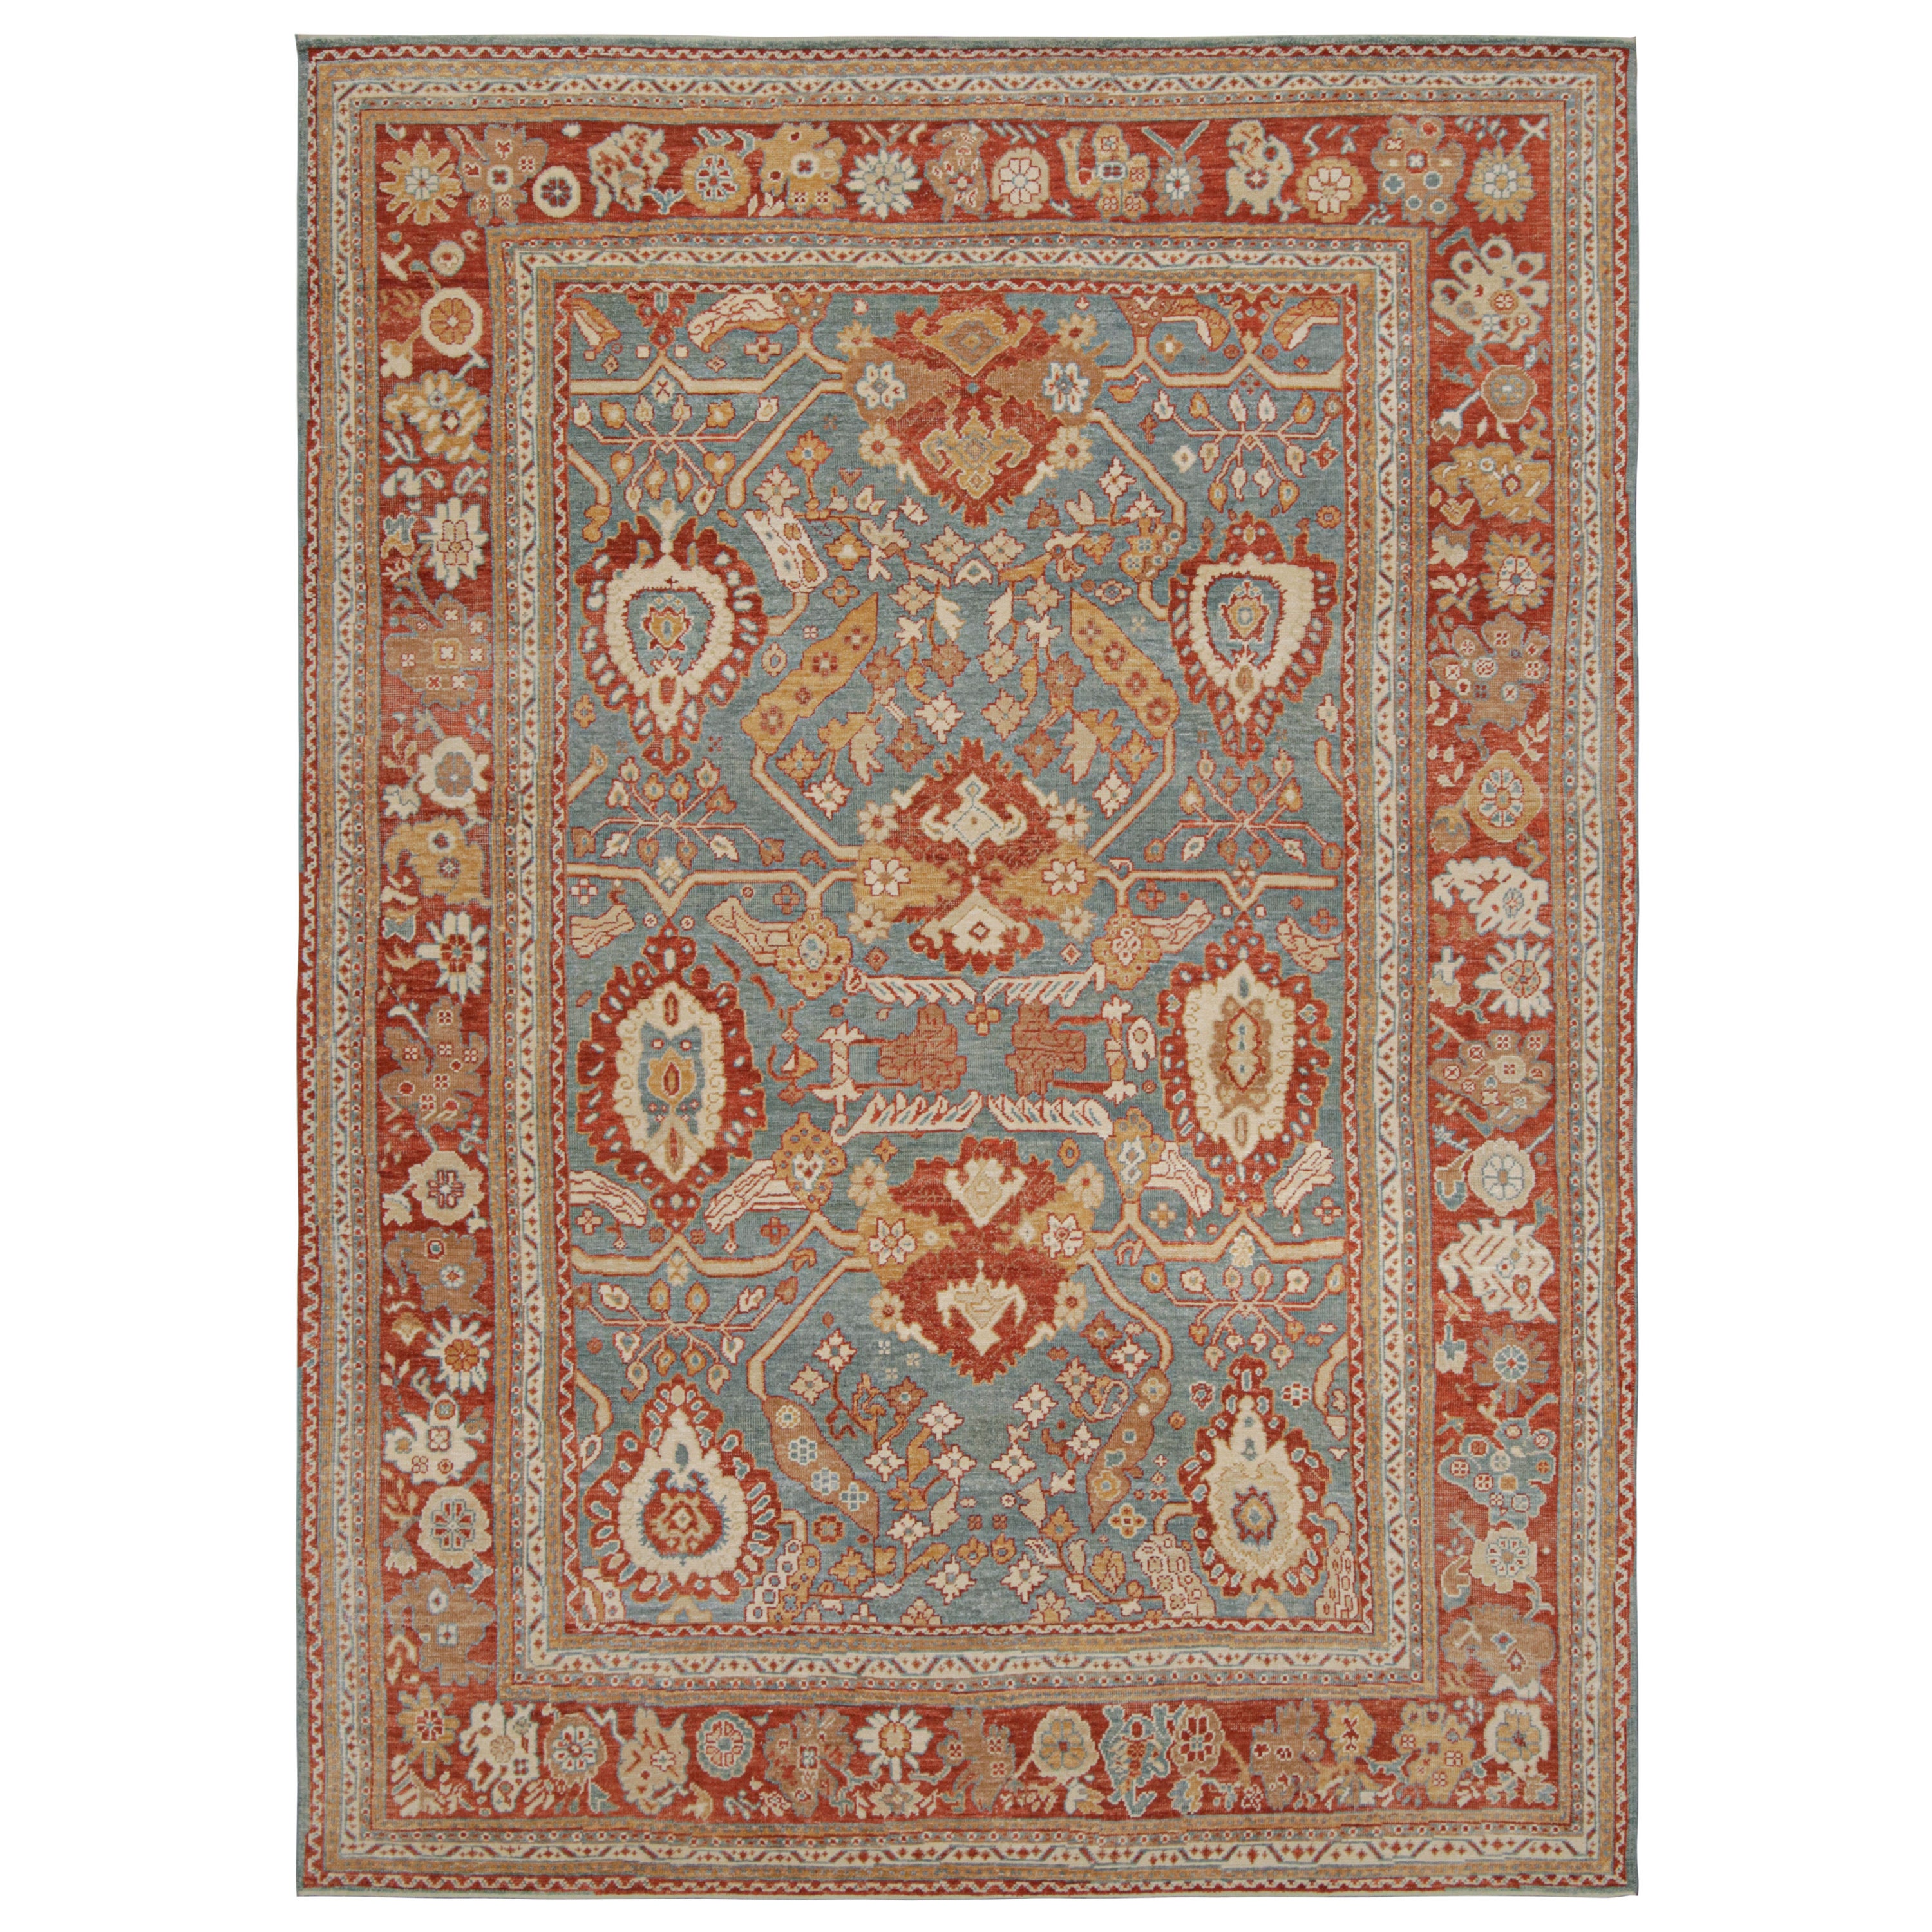 Rug & Kilim’s Oushak Style Rug In Red, Blue and Brown Floral Pattern